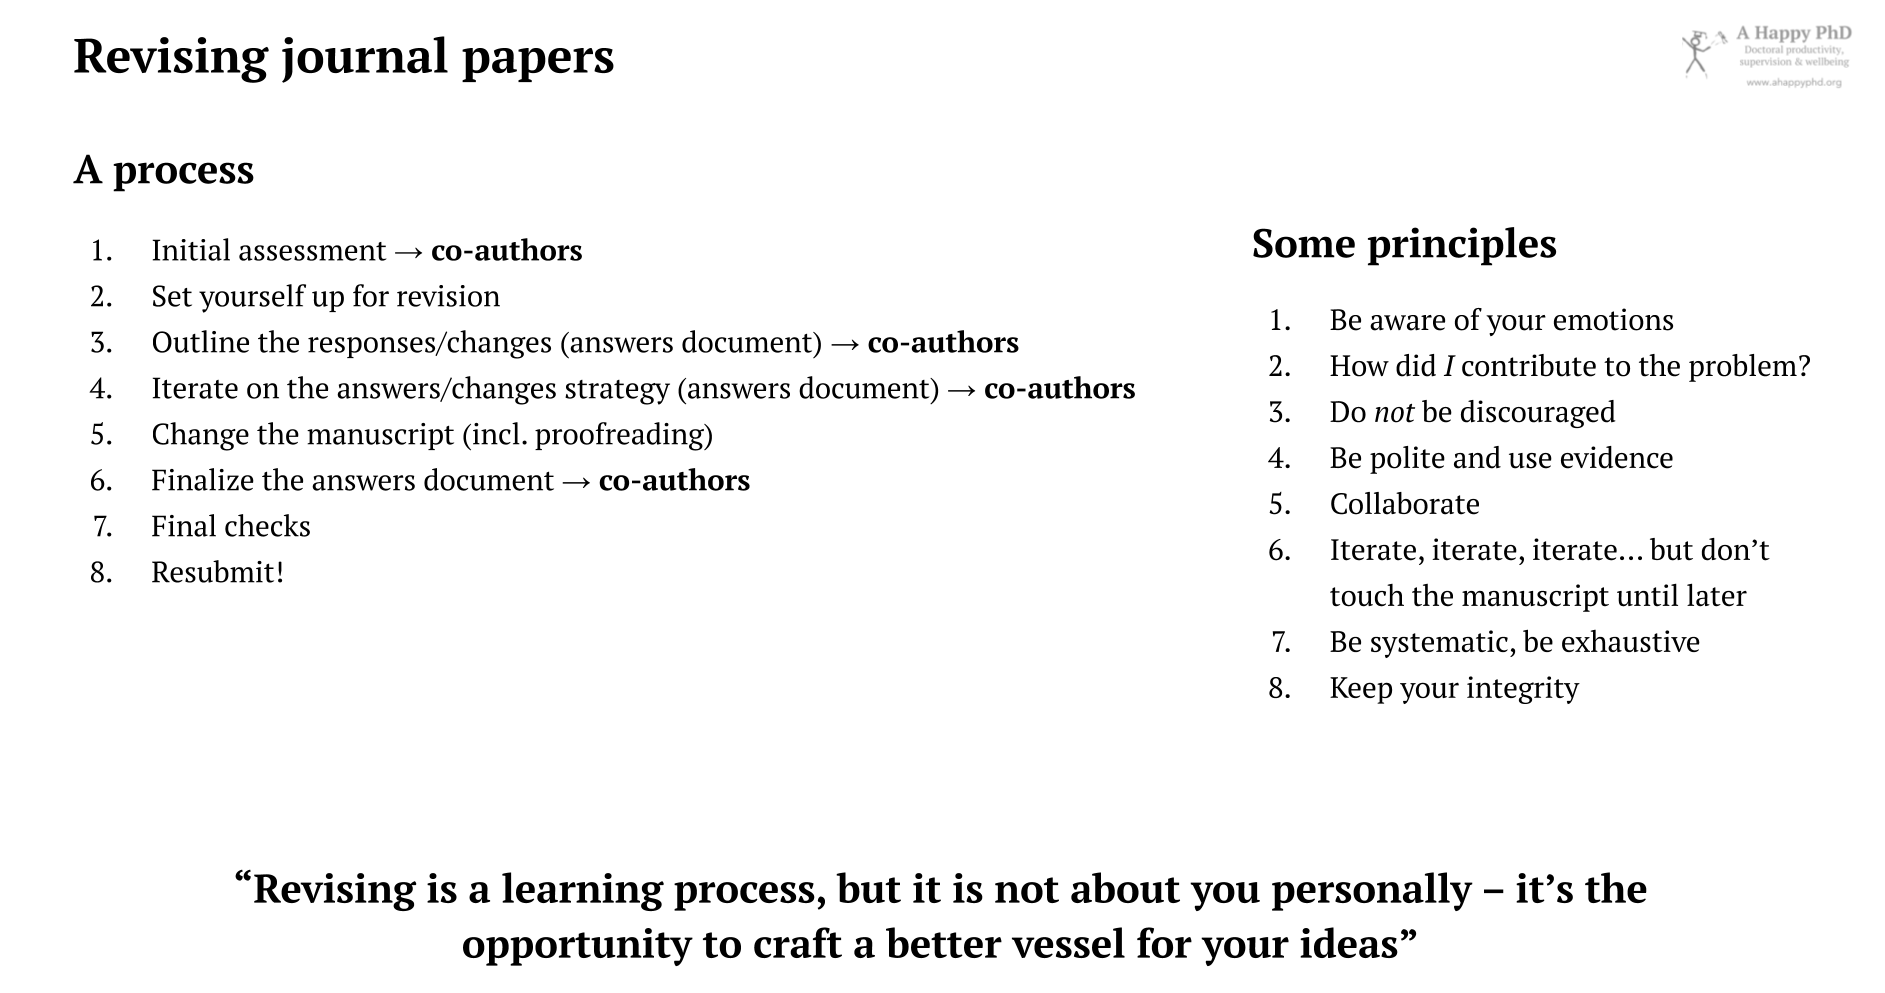 Eight steps and eight principles of revising papers